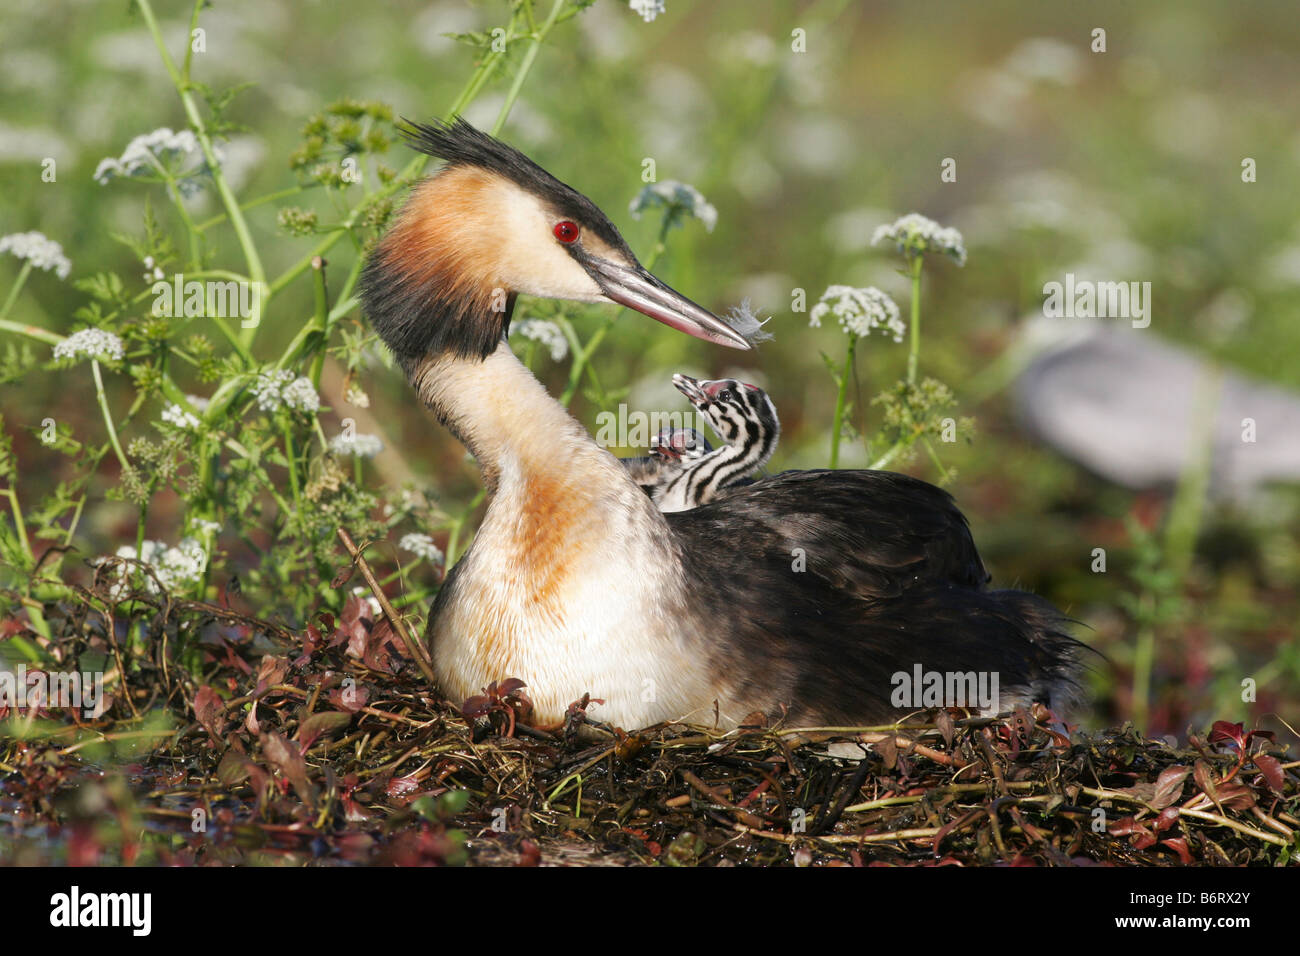 Great Crested Grebe with its chicks on the back Stock Photo